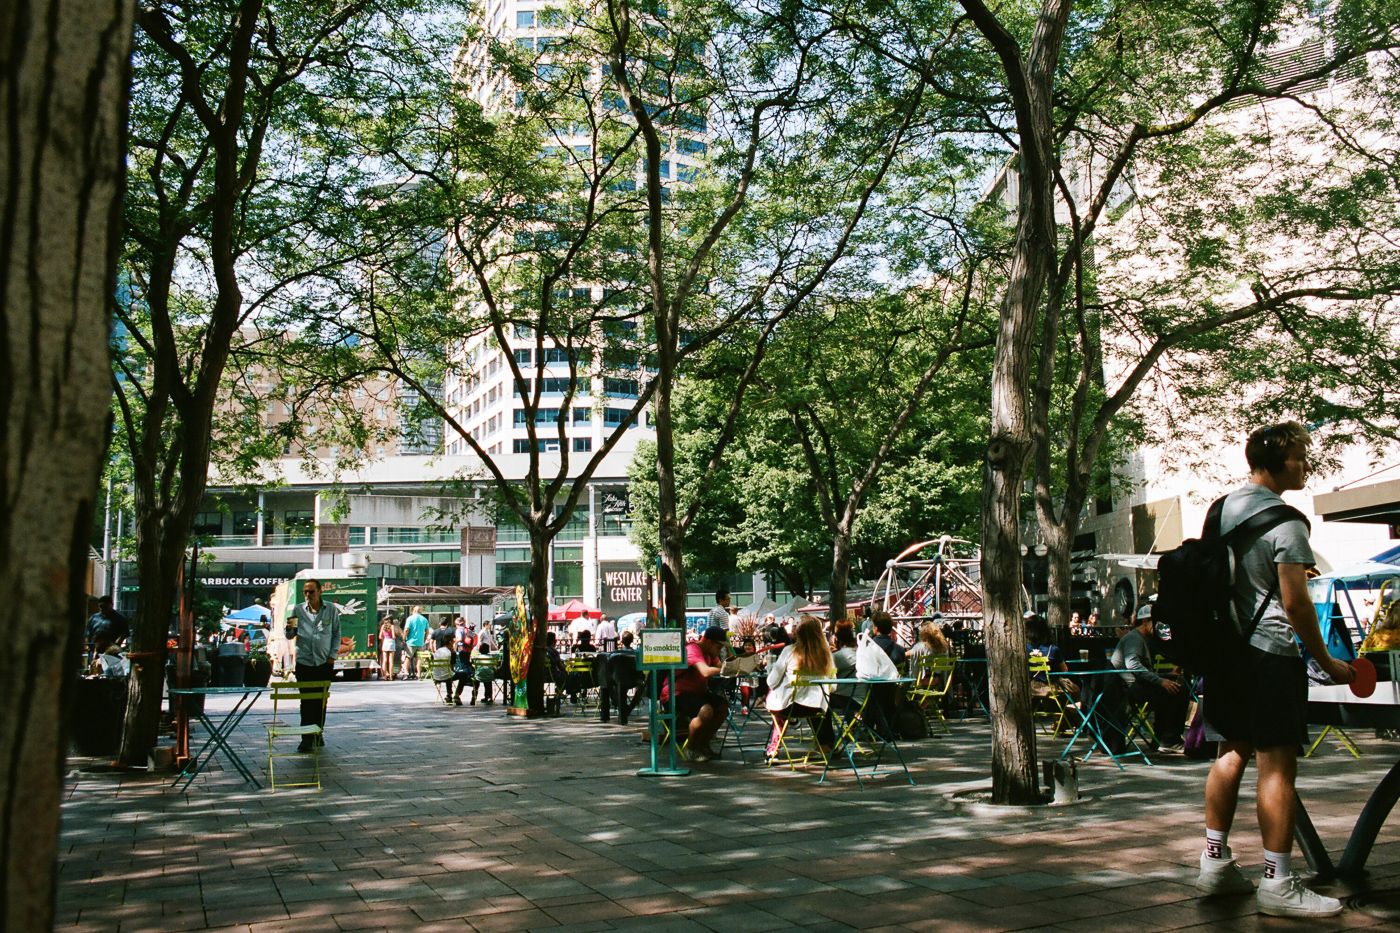 A public space with tables and chairs, where many people are spending time under the shade of trees.